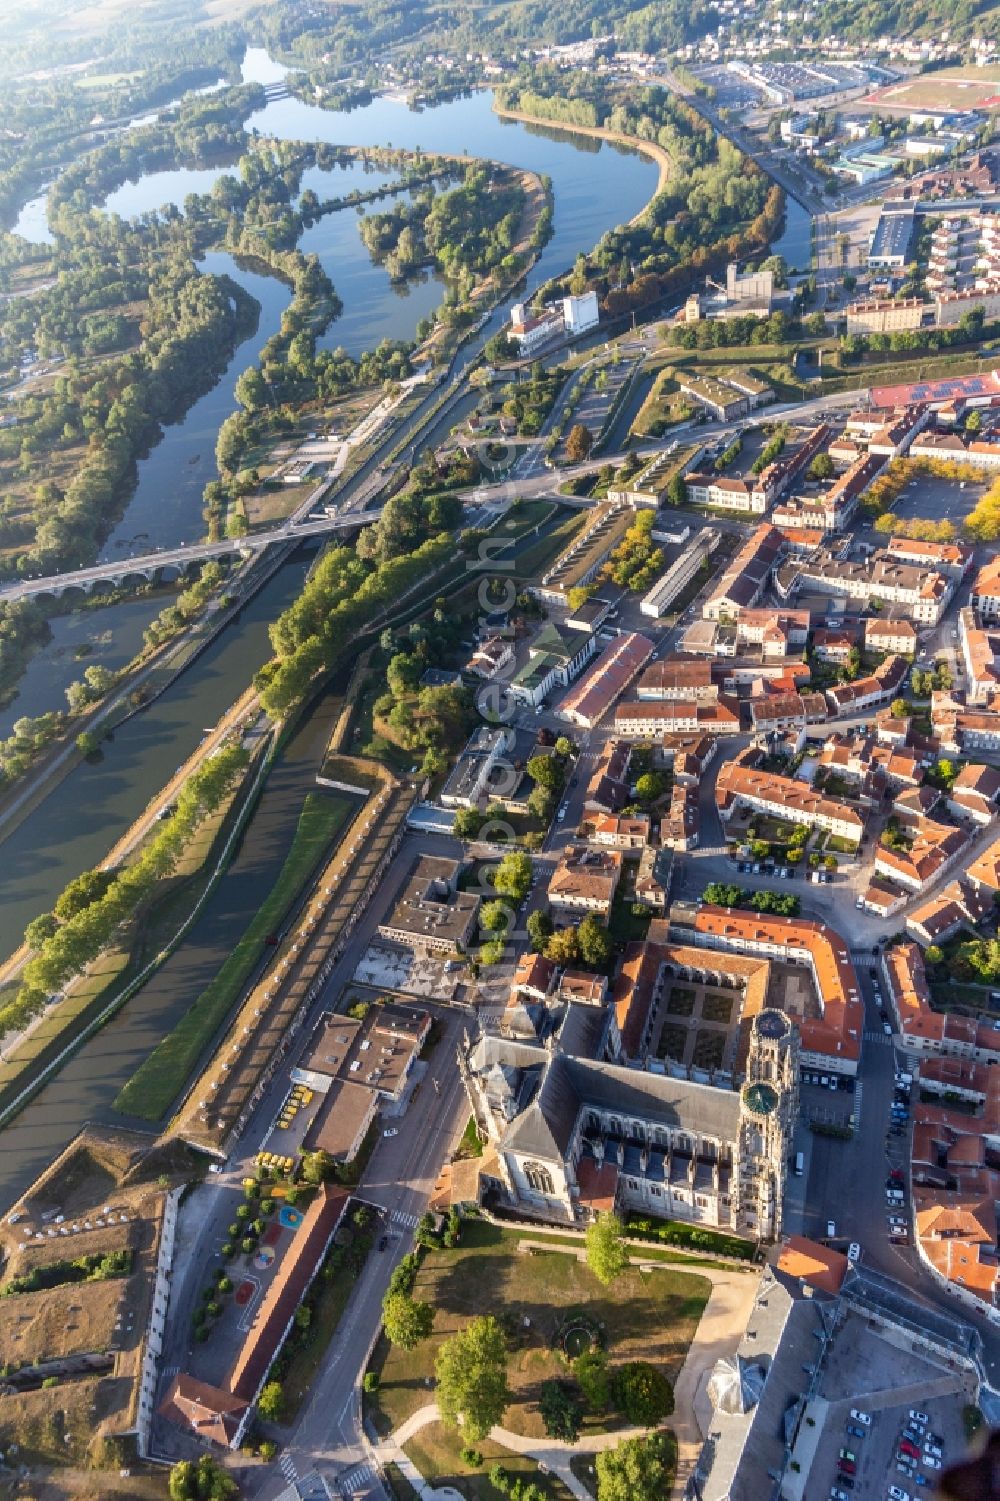 Aerial photograph Toul - Town on the banks of the river of the river Mosel in Toul in Grand Est, France